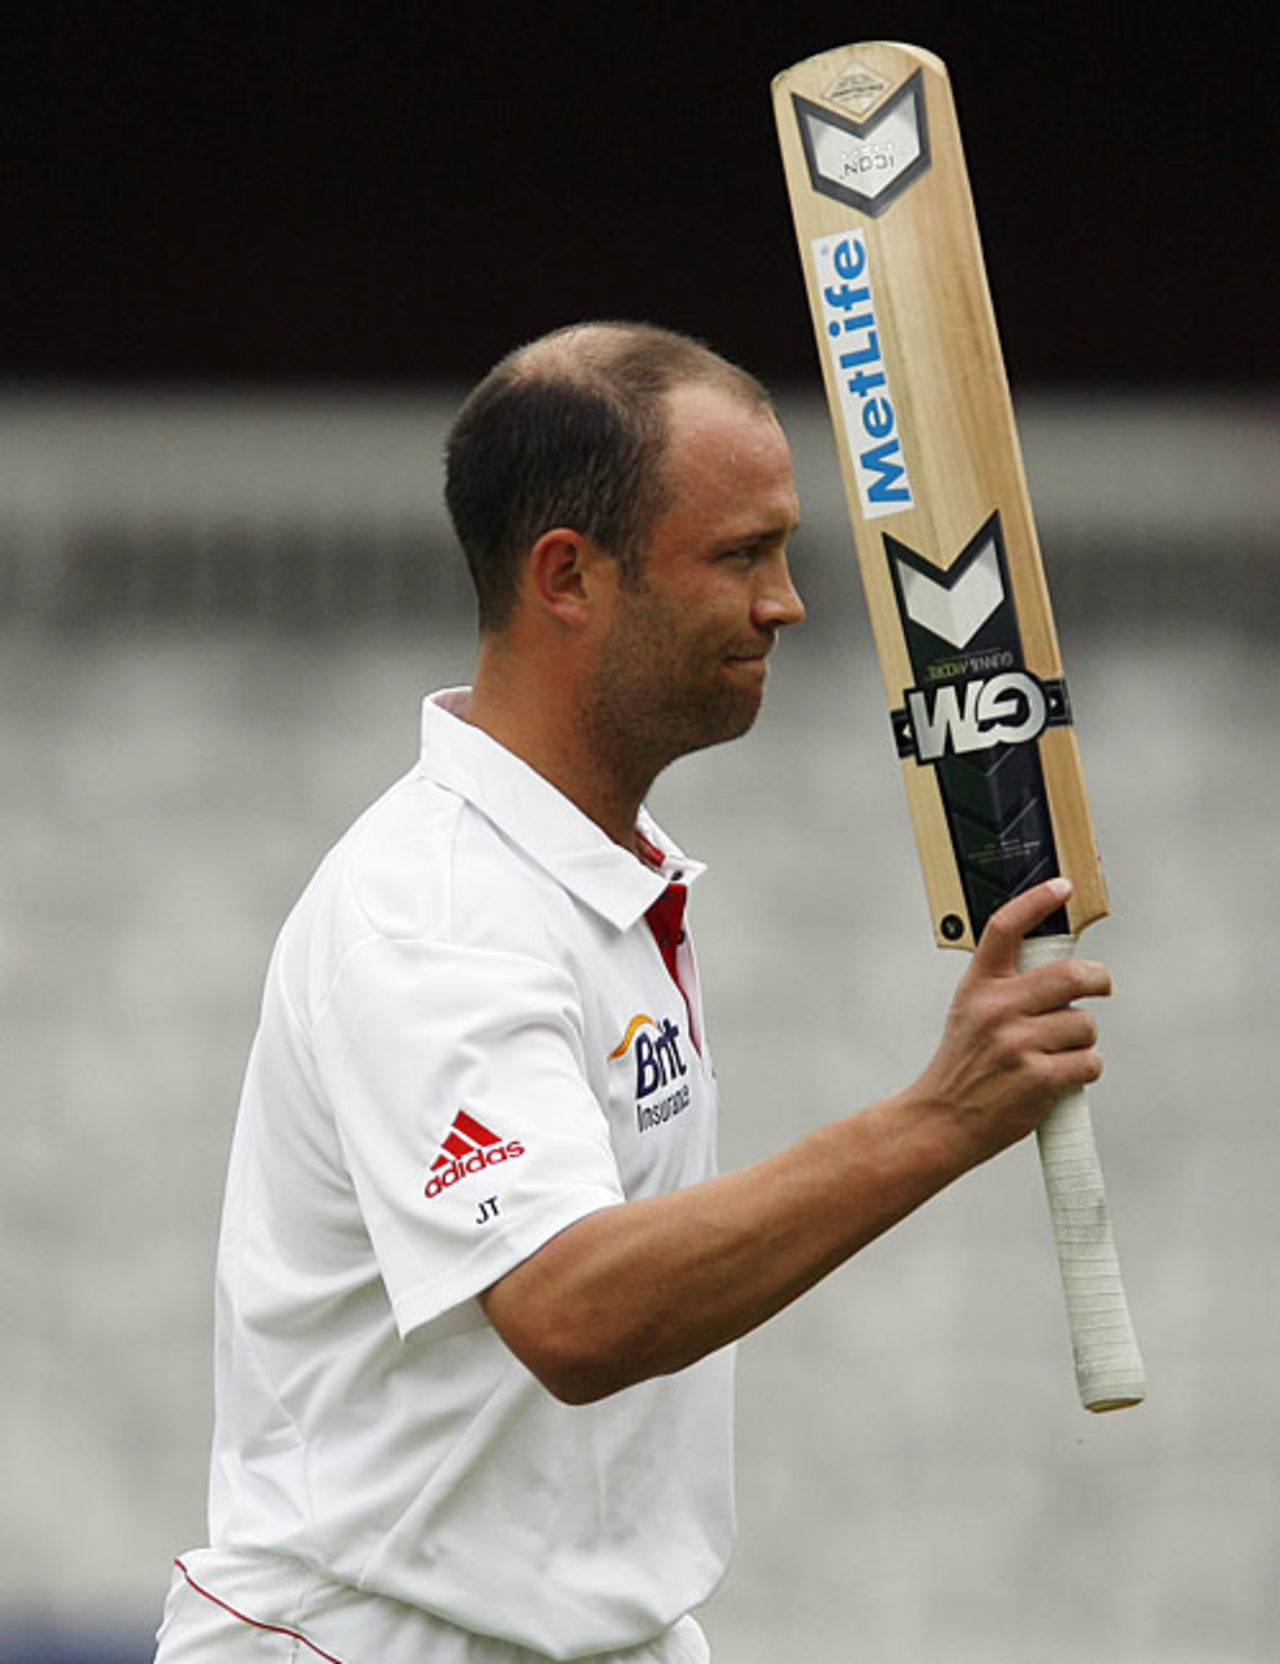 Jonathan Trott completed a very satisfying match for him by hitting the winning runs to end unbeaten on 36, England v Bangladesh, 1st Test, Lord's, May 31, 2010 
